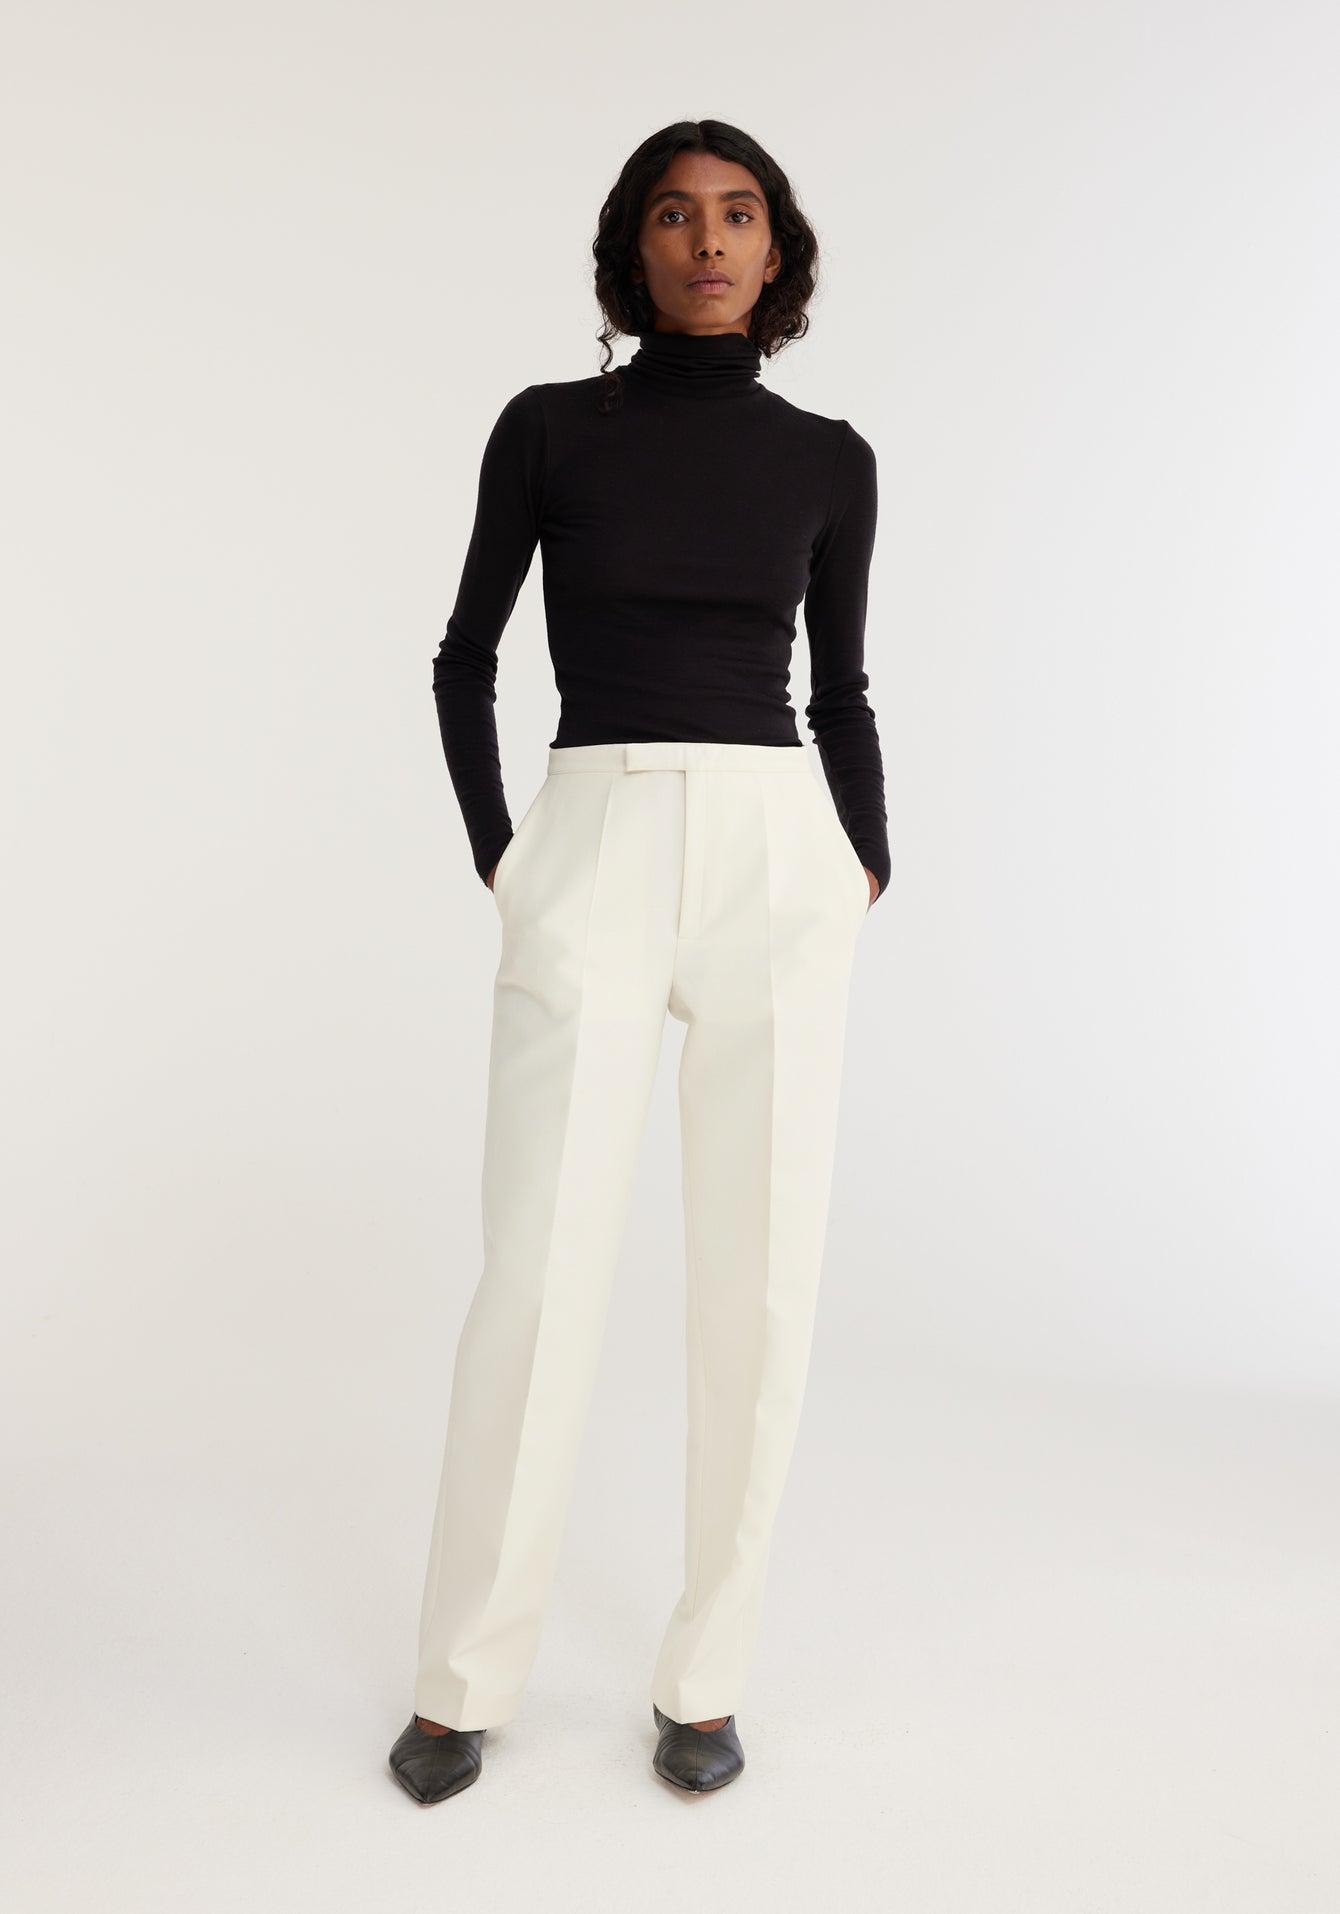 Tailored wool trousers